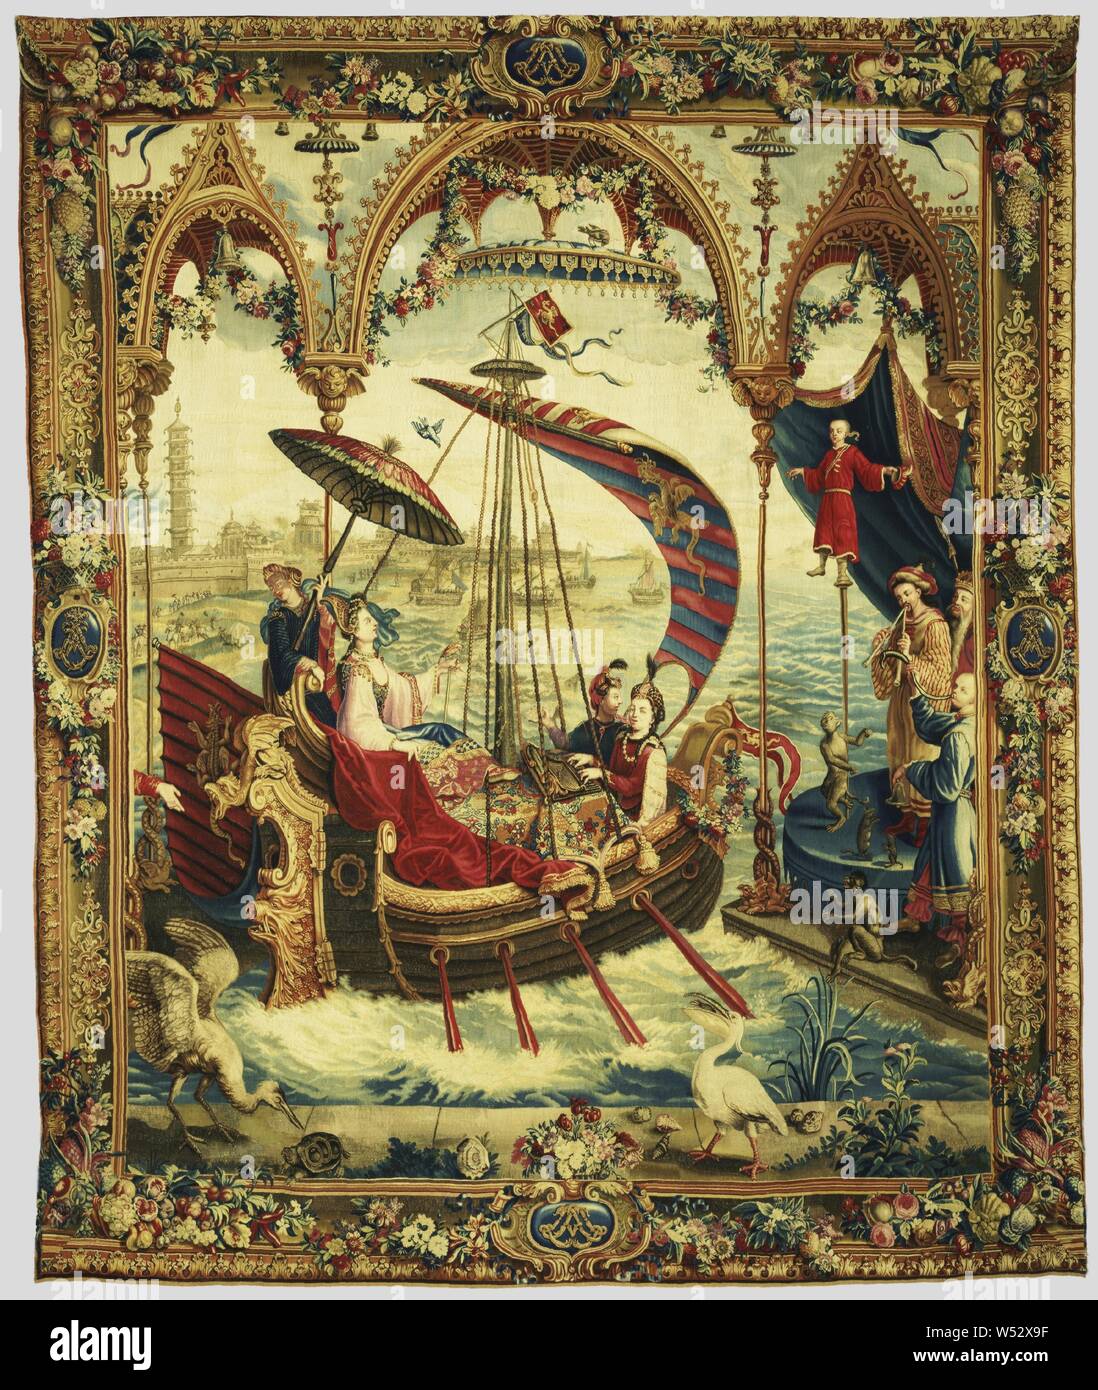 Tapestry: The Empress Sailing from The Story of the Emperor of China Series, After designs by Guy-Louis Vernansal (French, 1648 - 1729), and Jean-Baptiste Monnoyer (French, 1636 - 1699), and Jean-Baptiste Belin de Fontenay (French, 1653 - 1715), Woven at the Beauvais Manufactory (French, founded 1664), under the direction of Philippe Béhagle (French, 1641 - 1705), design about 1690, weave about 1697 - 1705, Wool and silk, 367.6 x 310.5 cm (144 3/4 x 122 1/4 in Stock Photo